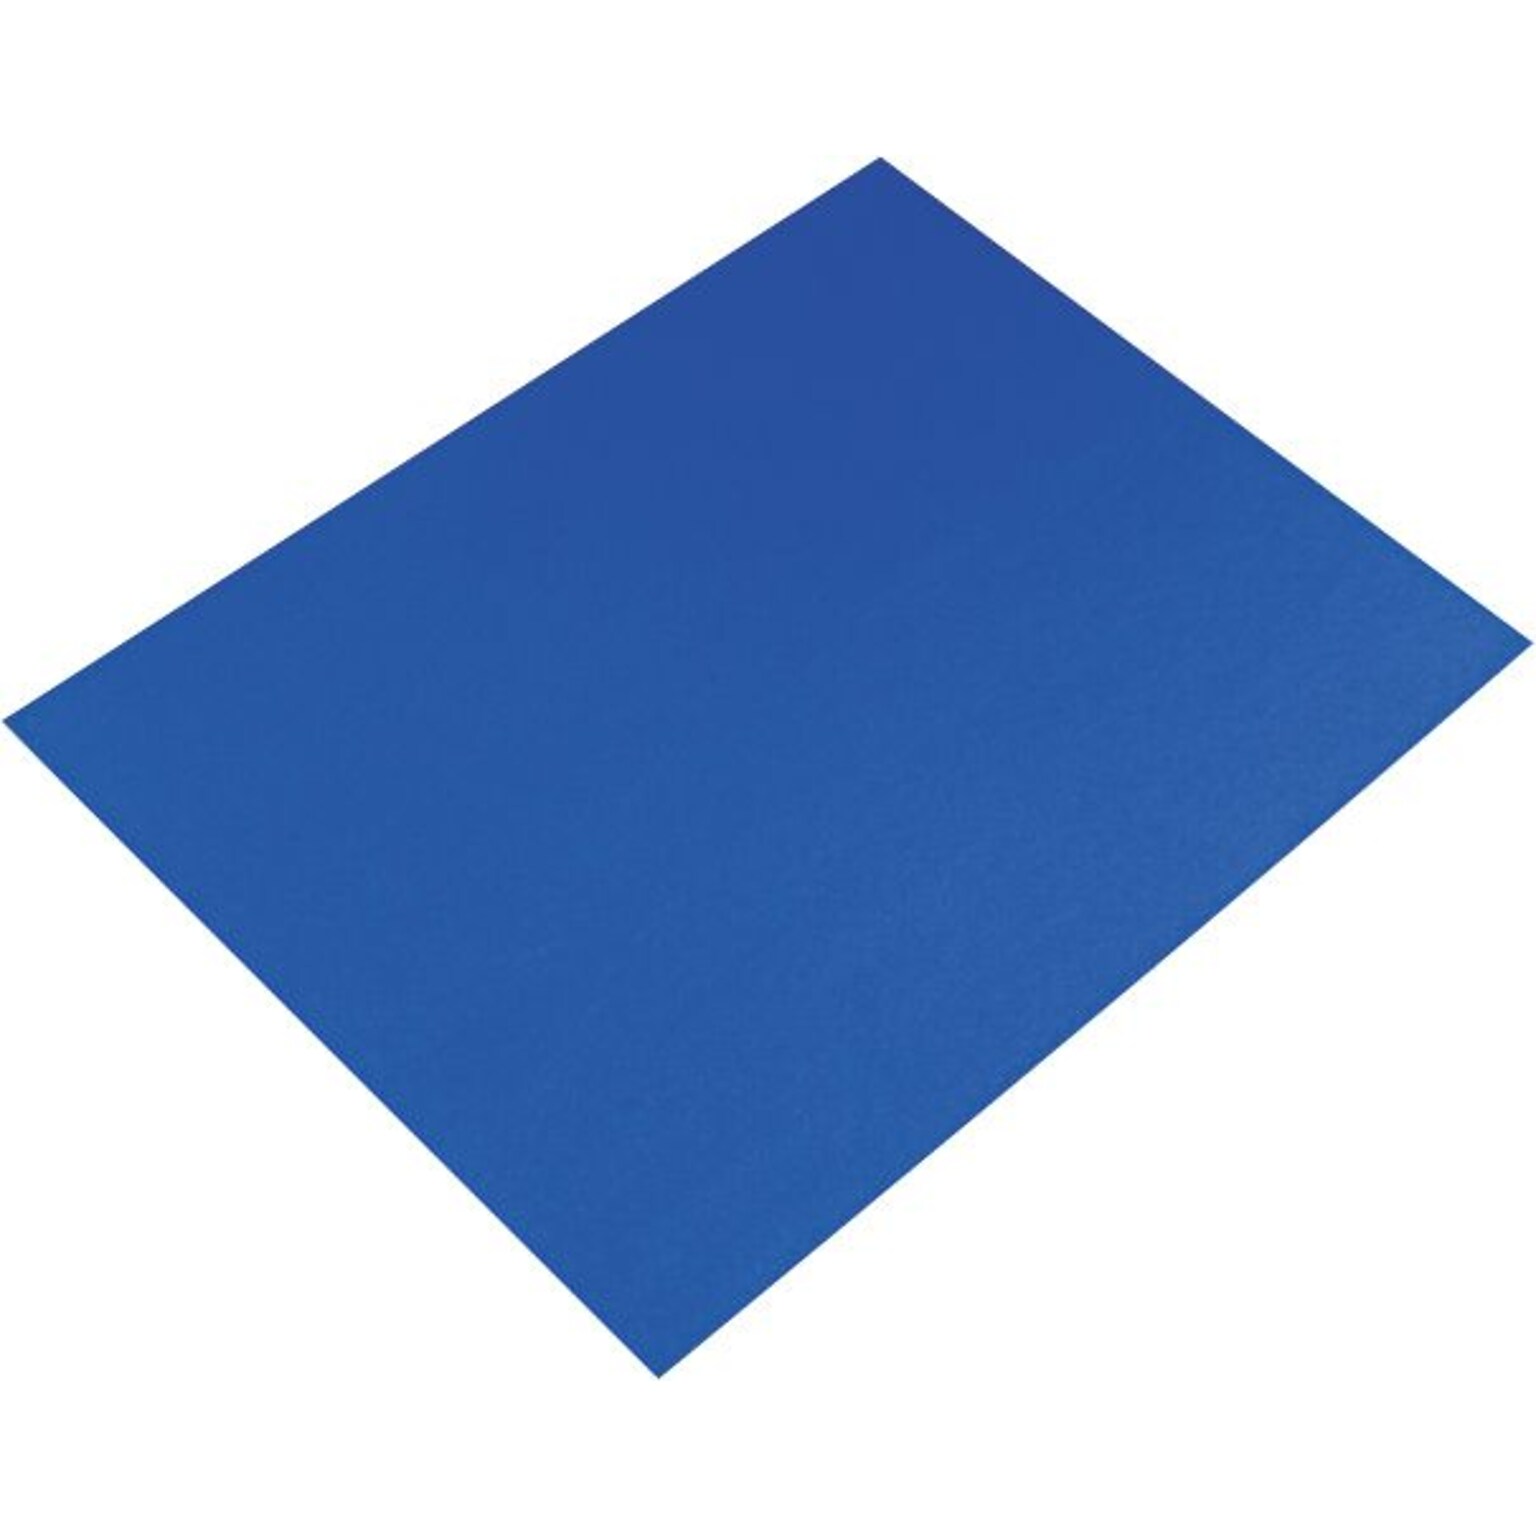 Pacon Colored Four-Ply Poster Board; 28 x 22, Dark Blue, 25/Ct